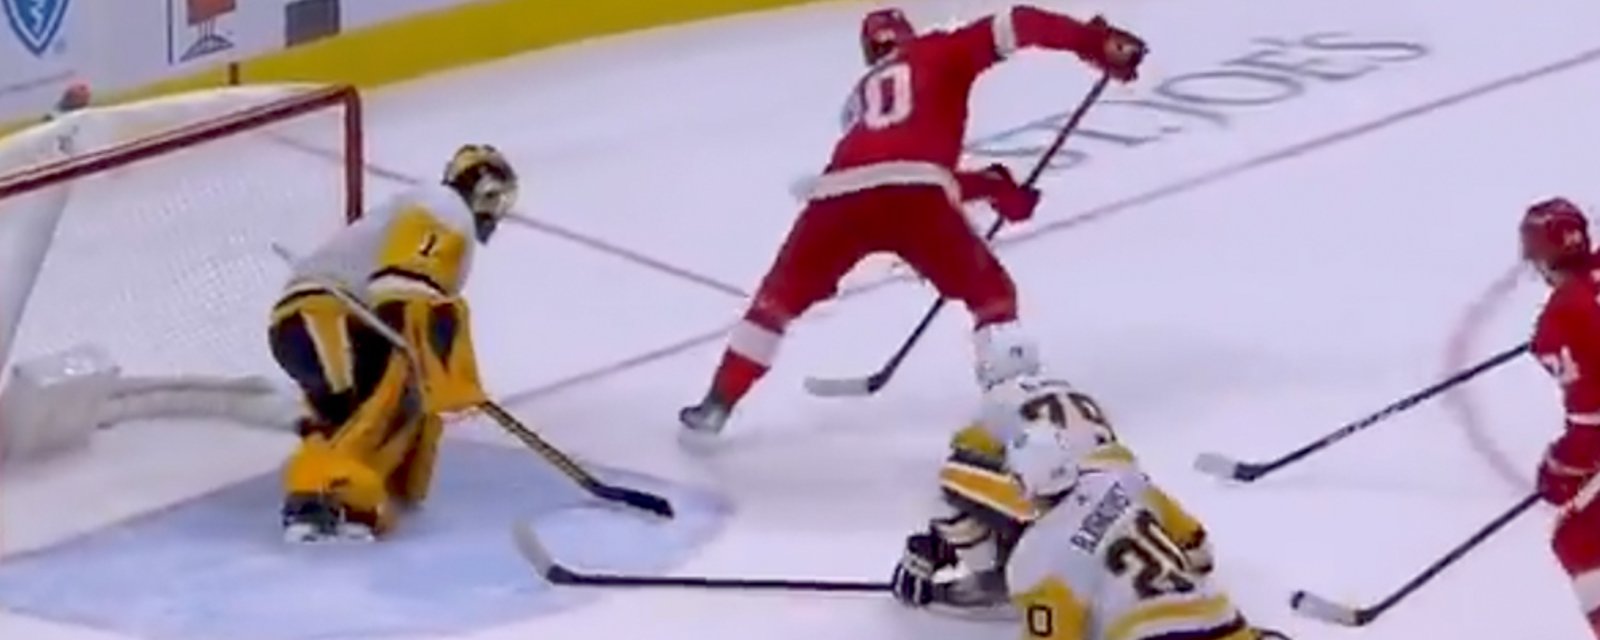 Joe Veleno's slick assist enables newcomer Pius Suter to find the back of the net (VIDEO)